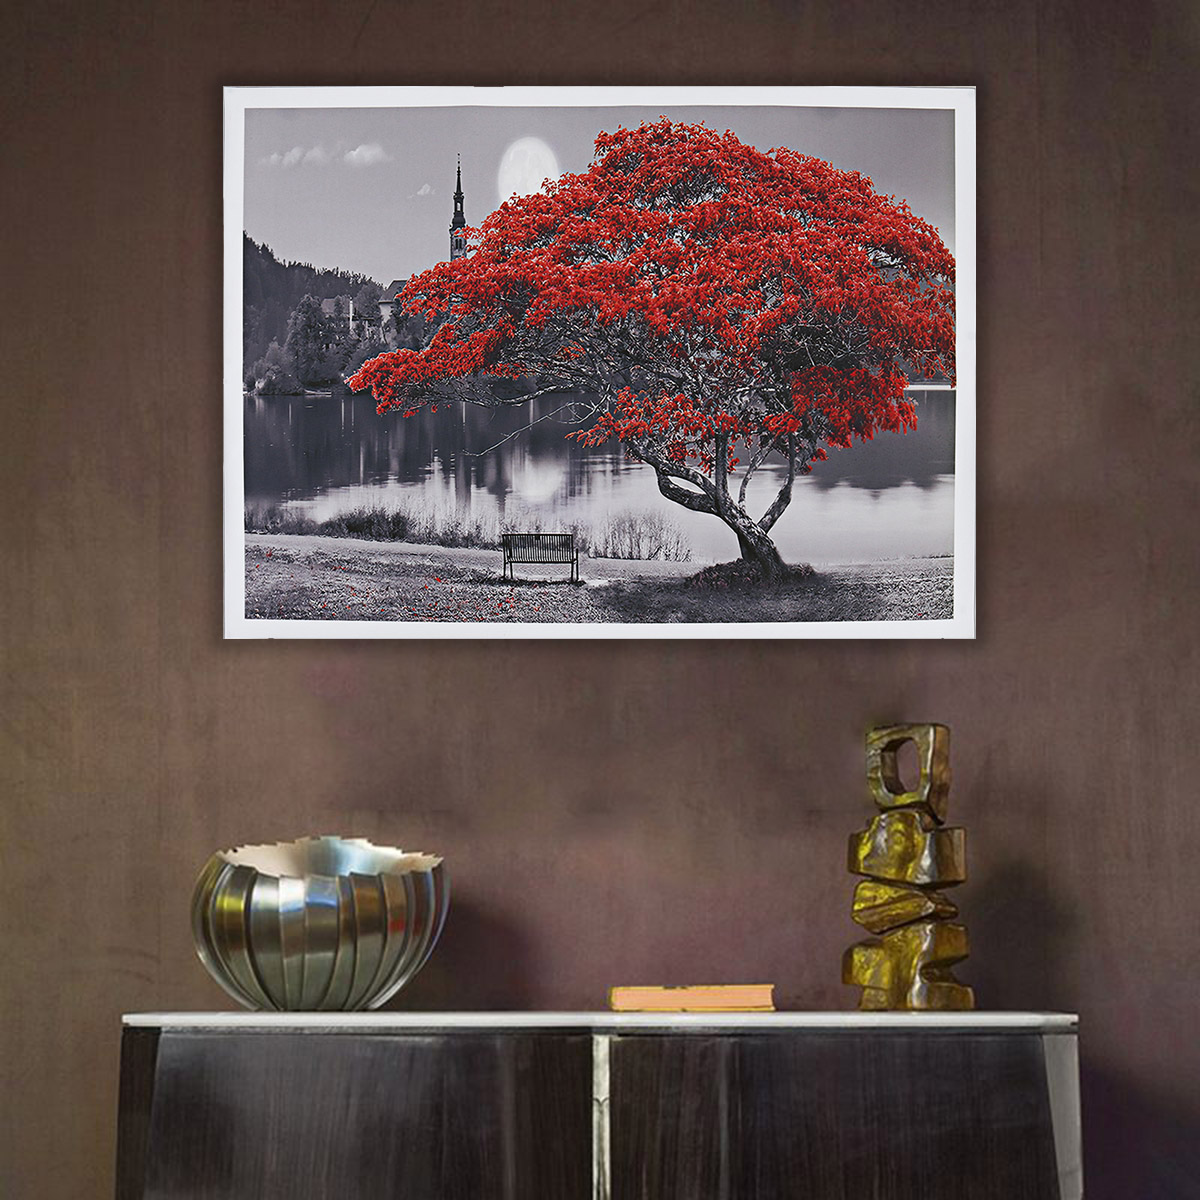 Find 1 Piece Big Tree Canvas Painting Wall Decorative Print Art Picture Unframed Wall Hanging Home Office Decorations for Sale on Gipsybee.com with cryptocurrencies